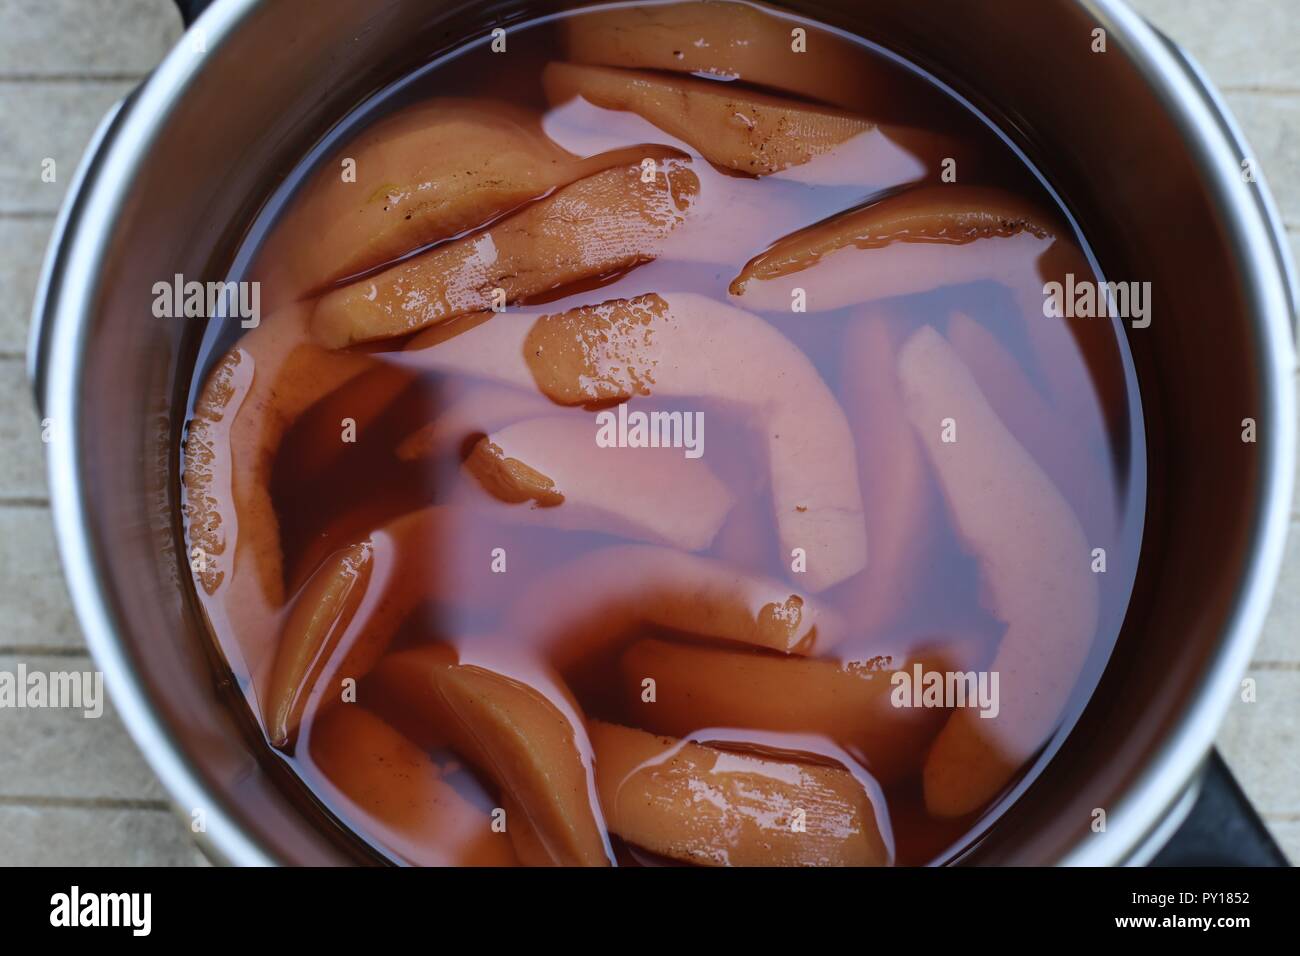 Dish With Quince Pieces. Stack of fresh peeled quince slices in a glass dish before being cooked for dessert. Stock Photo